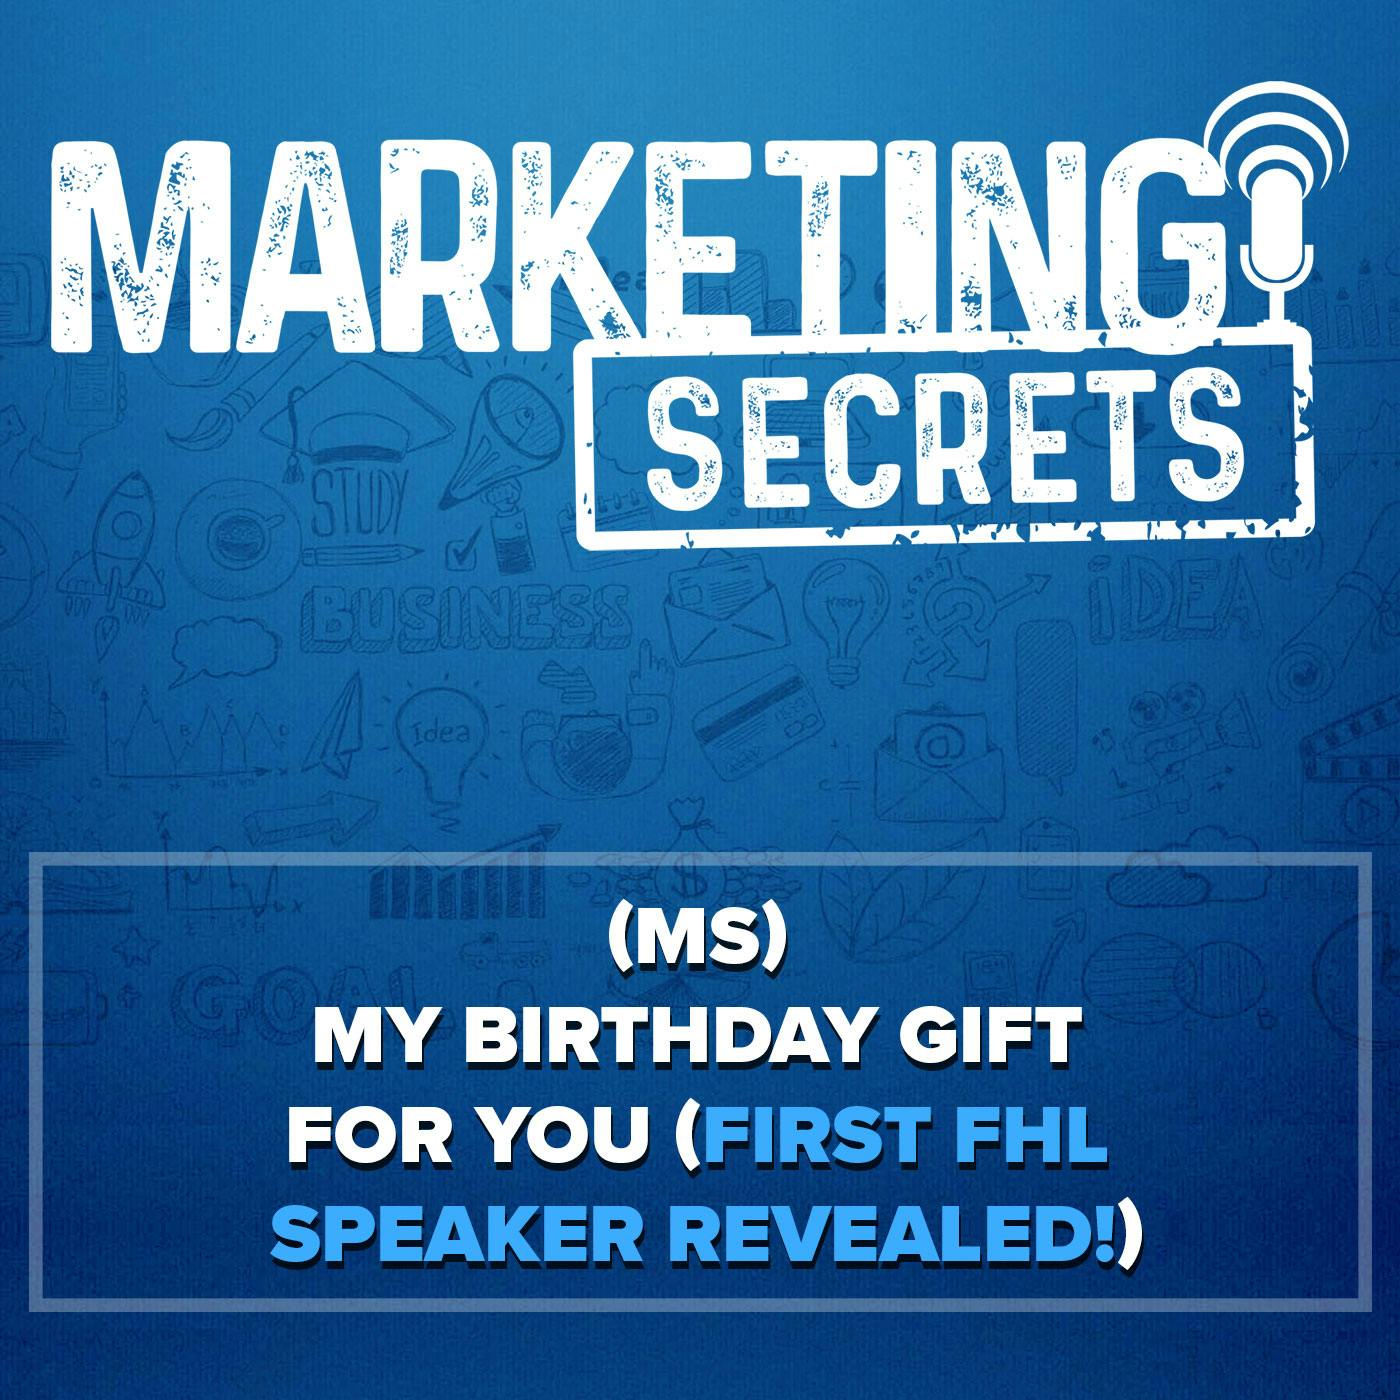 My Birthday Gift For You (First FHL Speaker Revealed!)